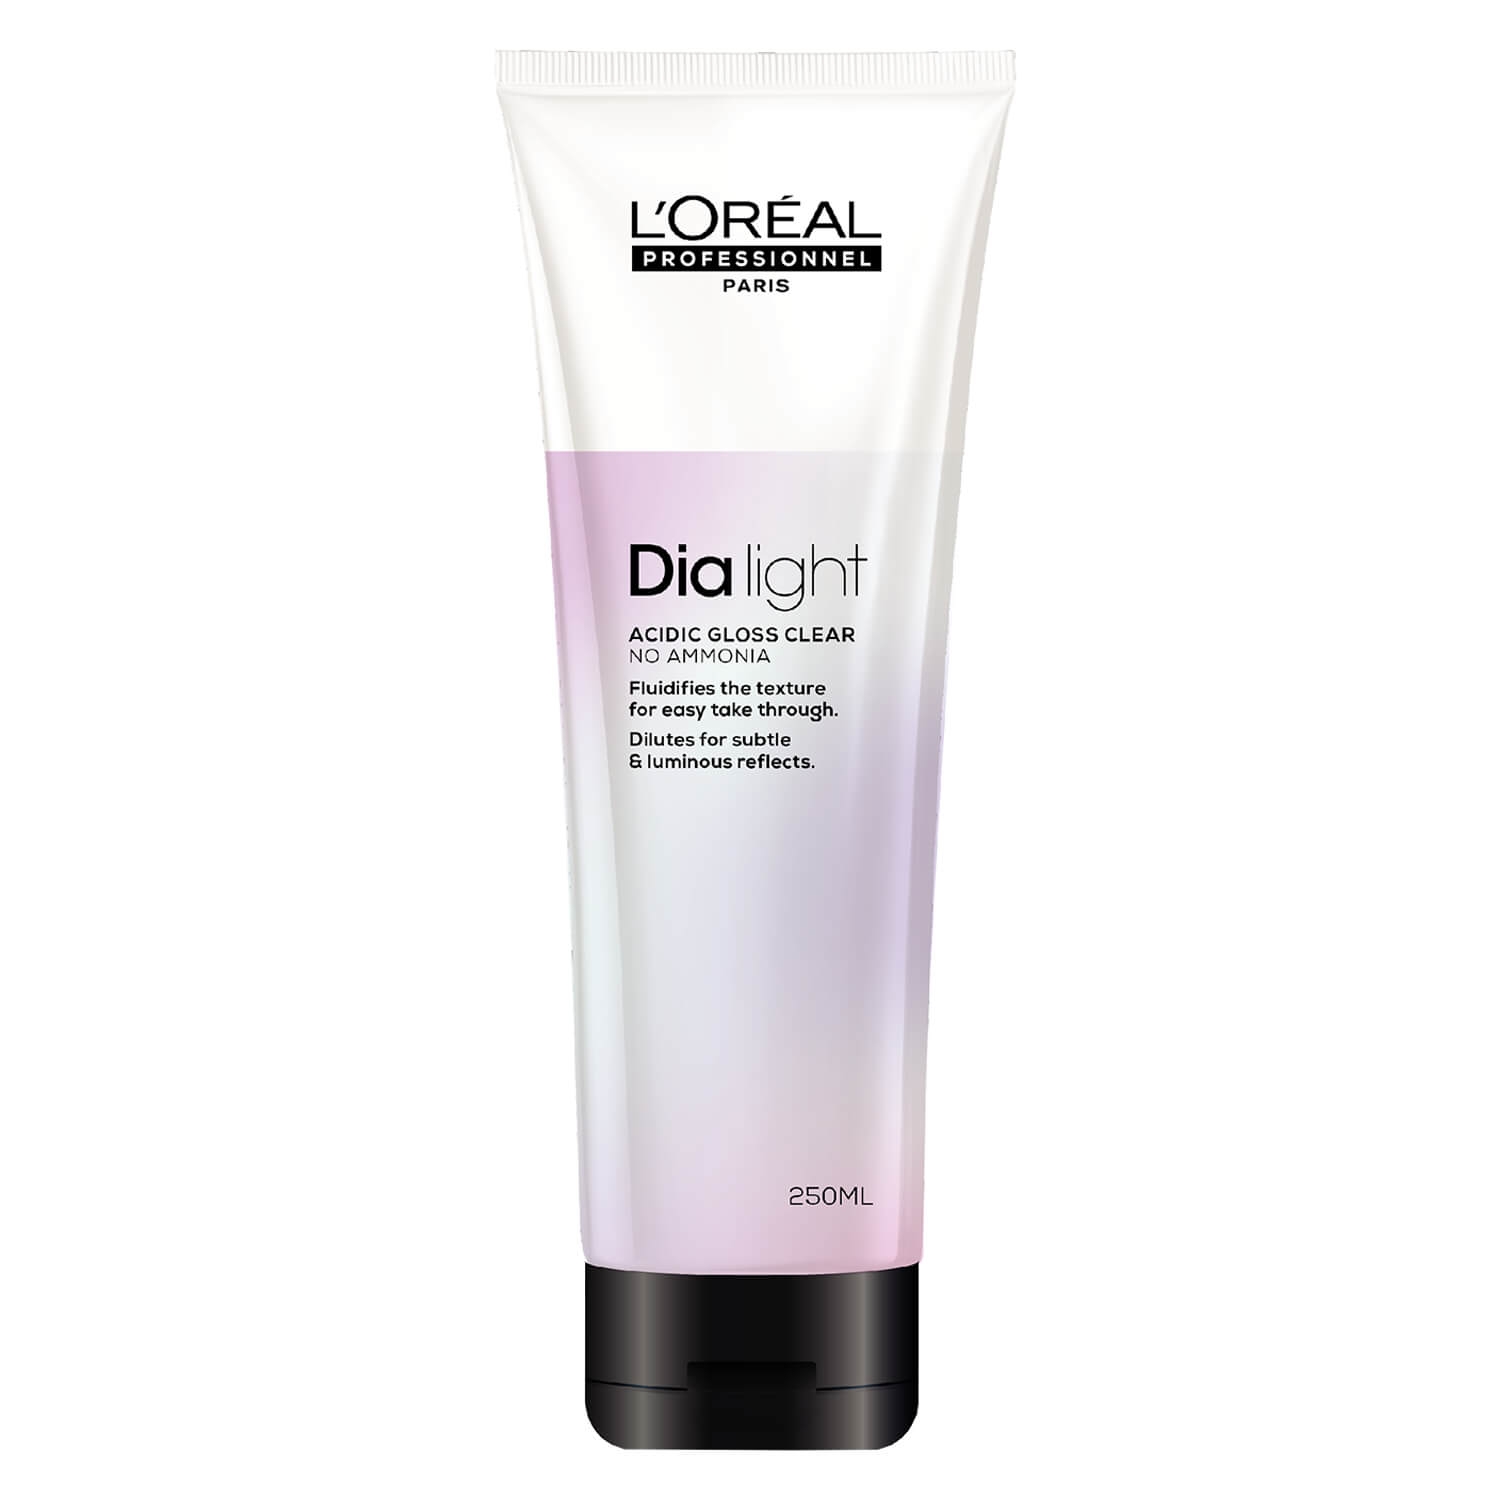 Product image from DIALight - Acidic Gloss Clear